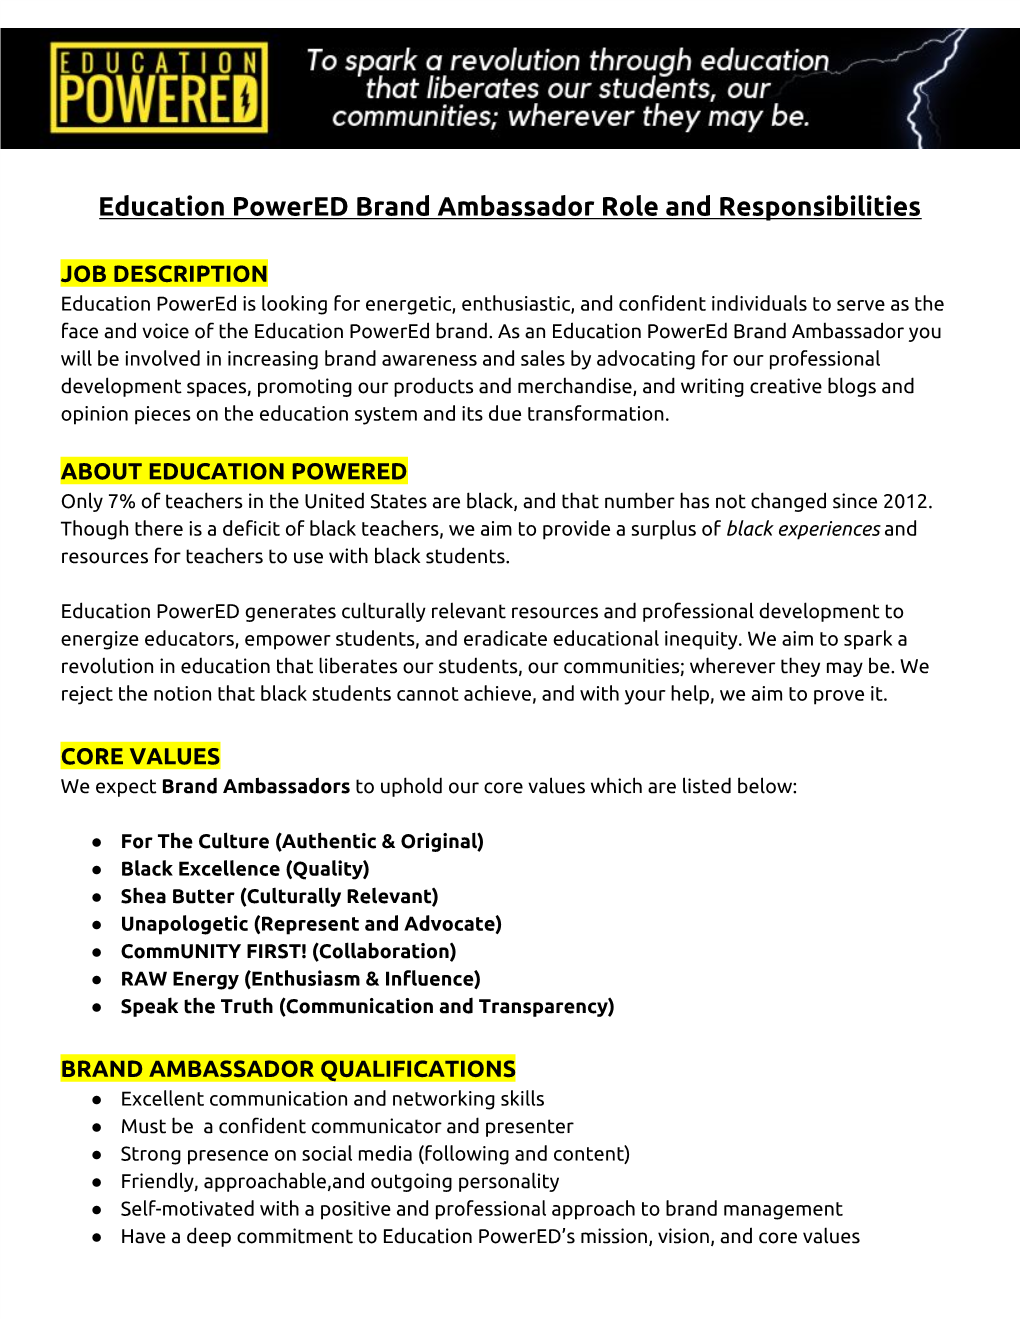 Education Powered Brand Ambassador Role and Responsibilities